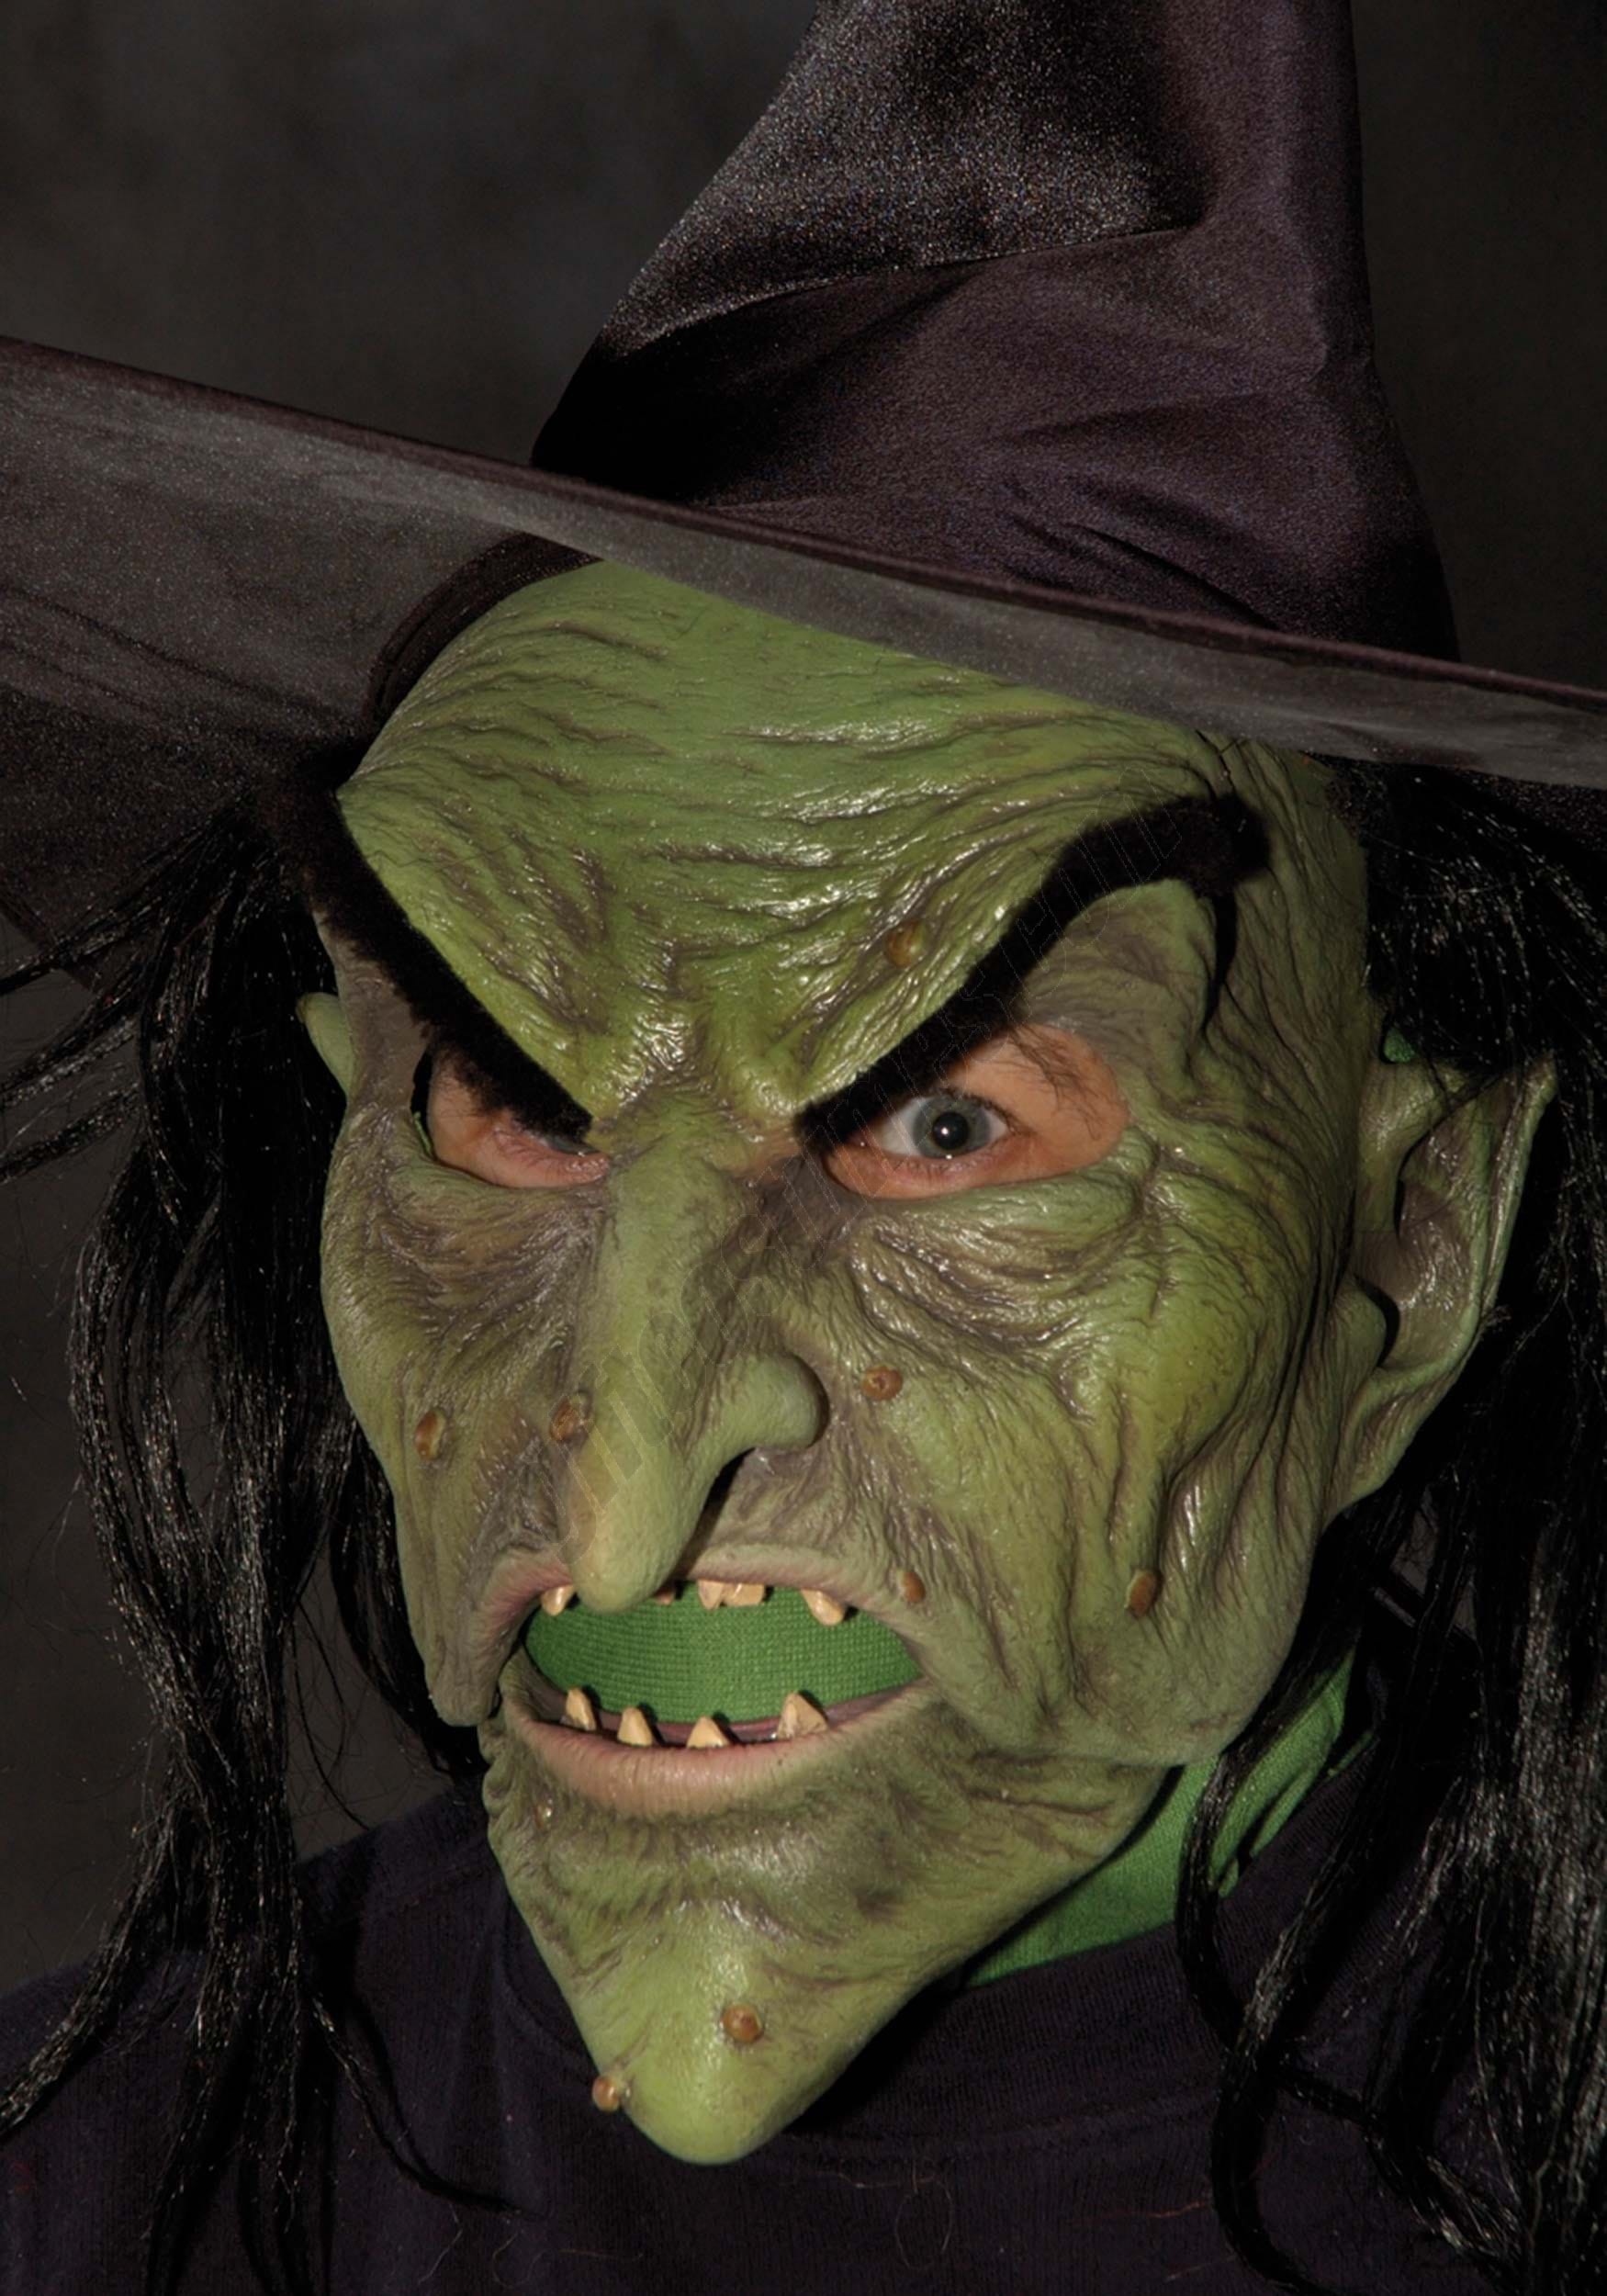 Adult Wicked Witch Mask Promotions - Adult Wicked Witch Mask Promotions